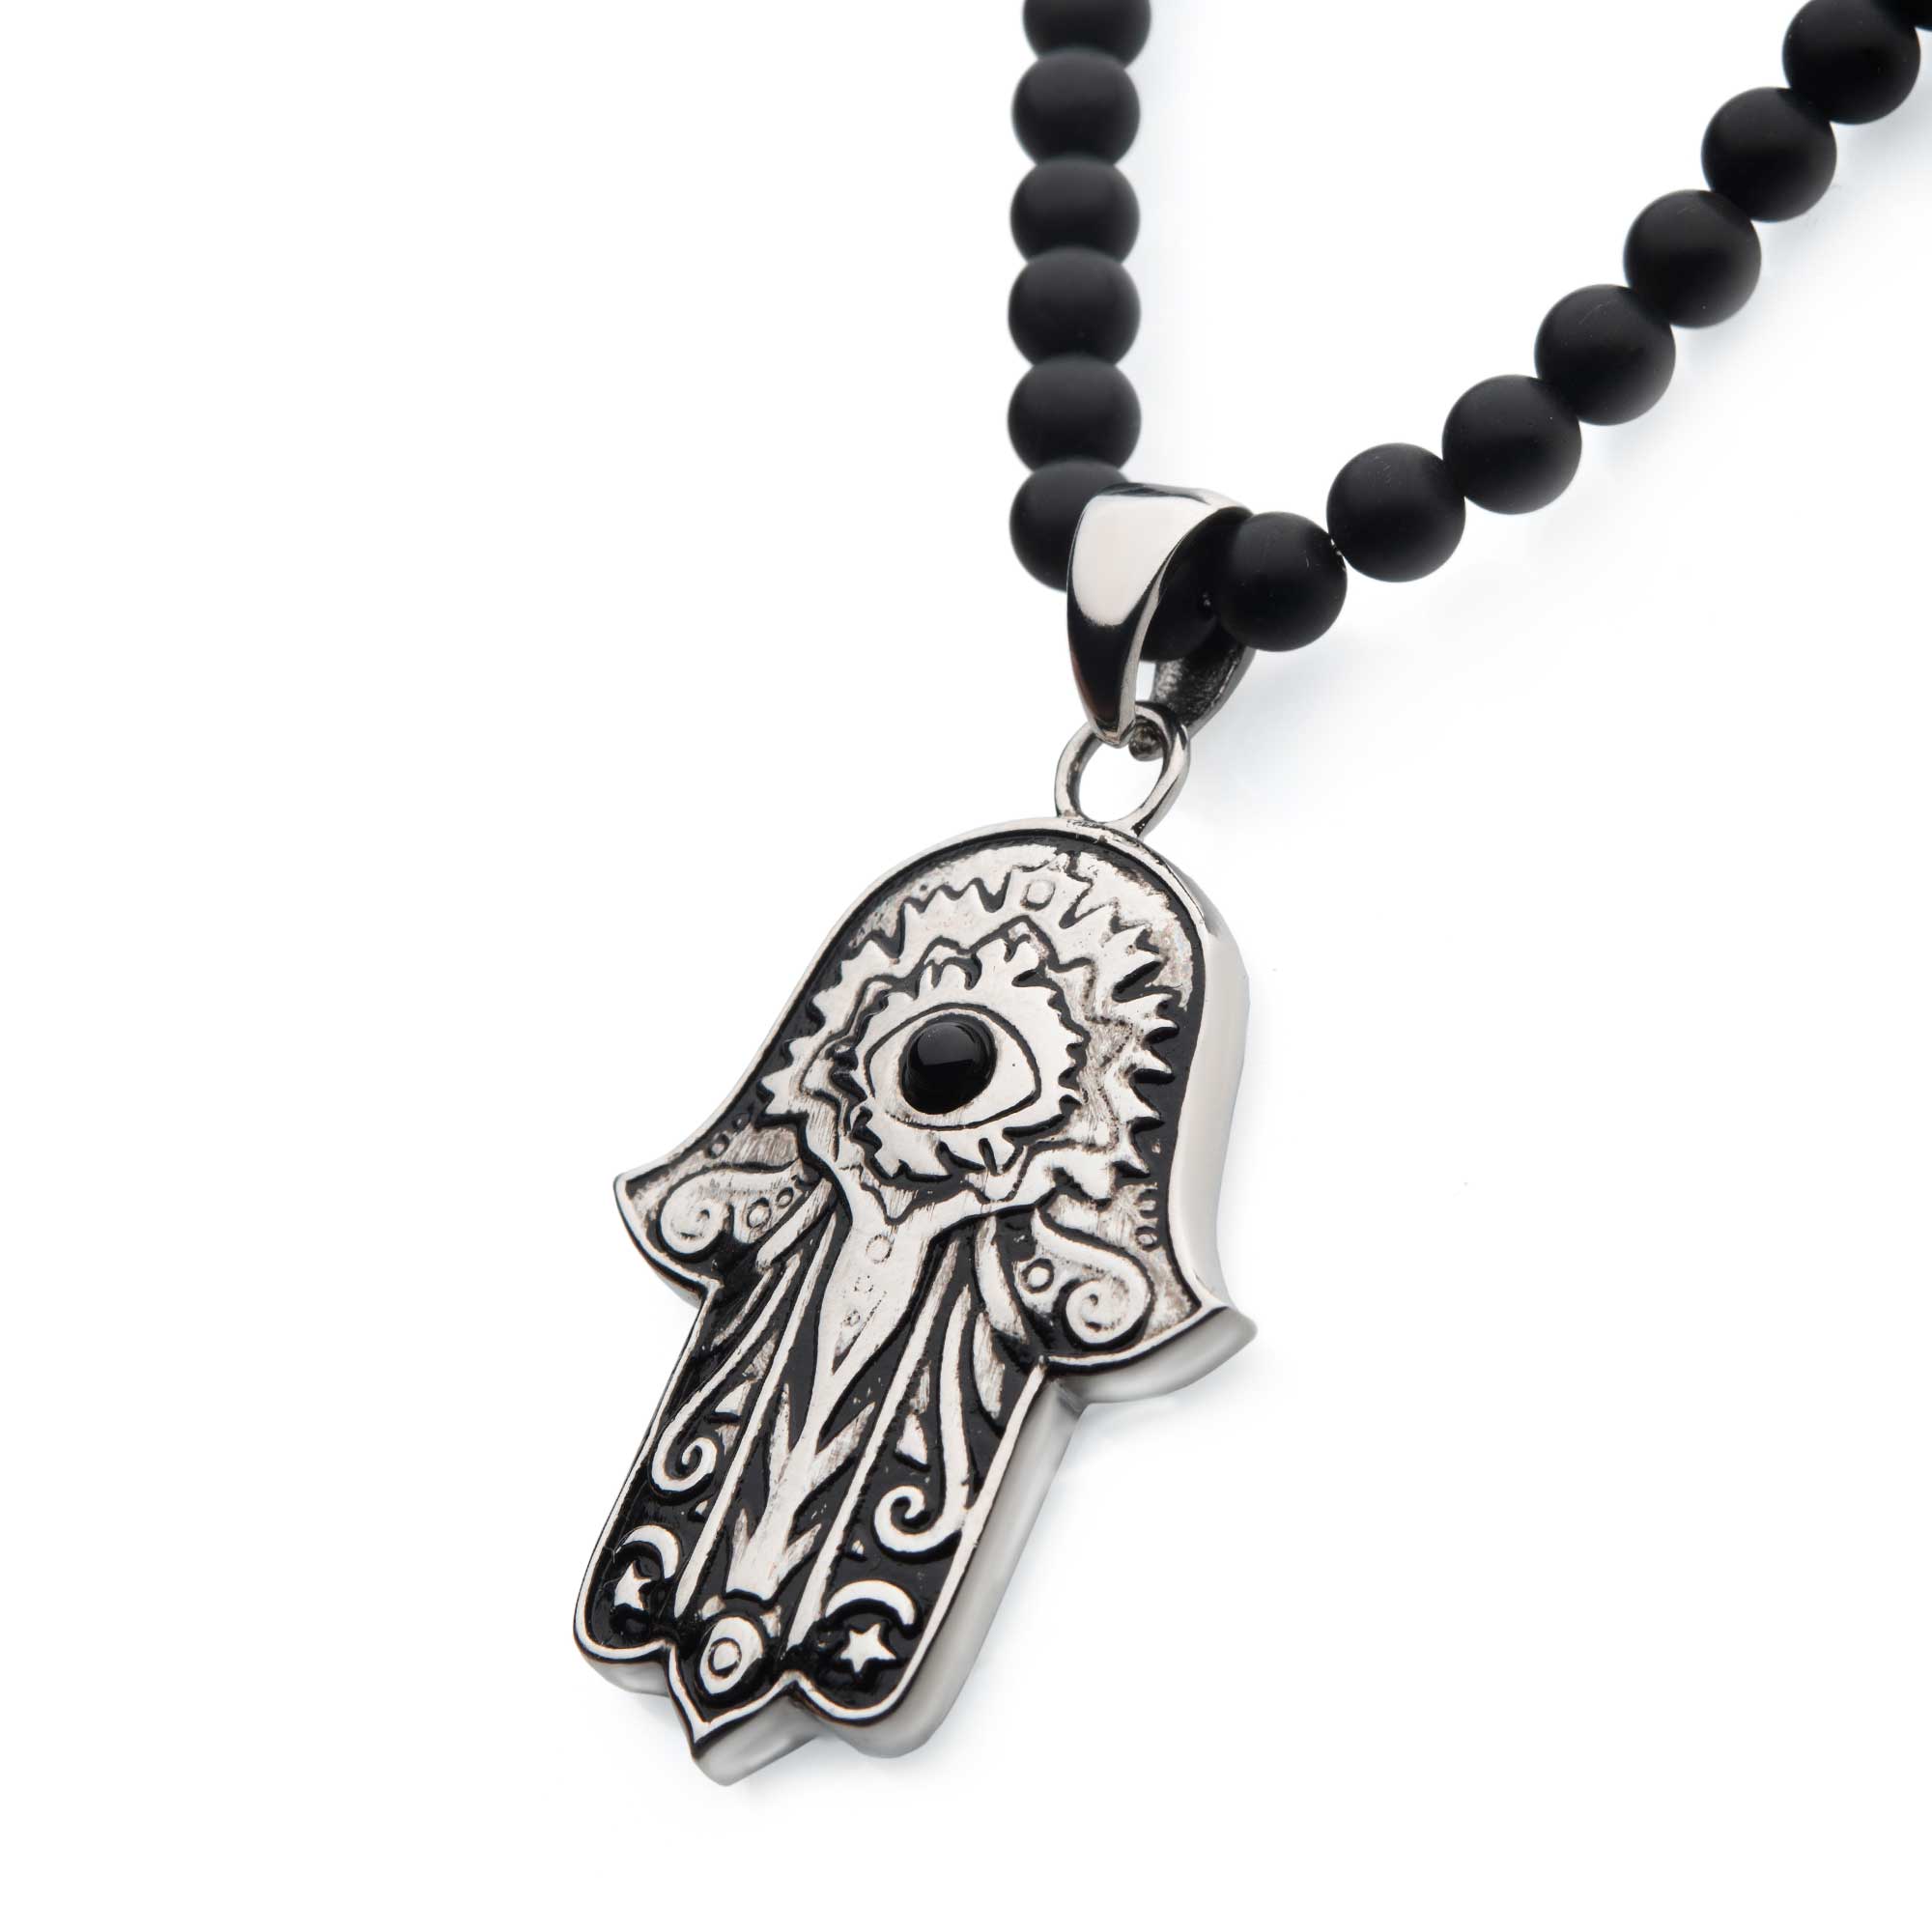 Stainless Steel with Centerpiece Black Agate Stone Hamsa Pendant, with Black Agate Stone Bead Necklace Image 2 K. Martin Jeweler Dodge City, KS